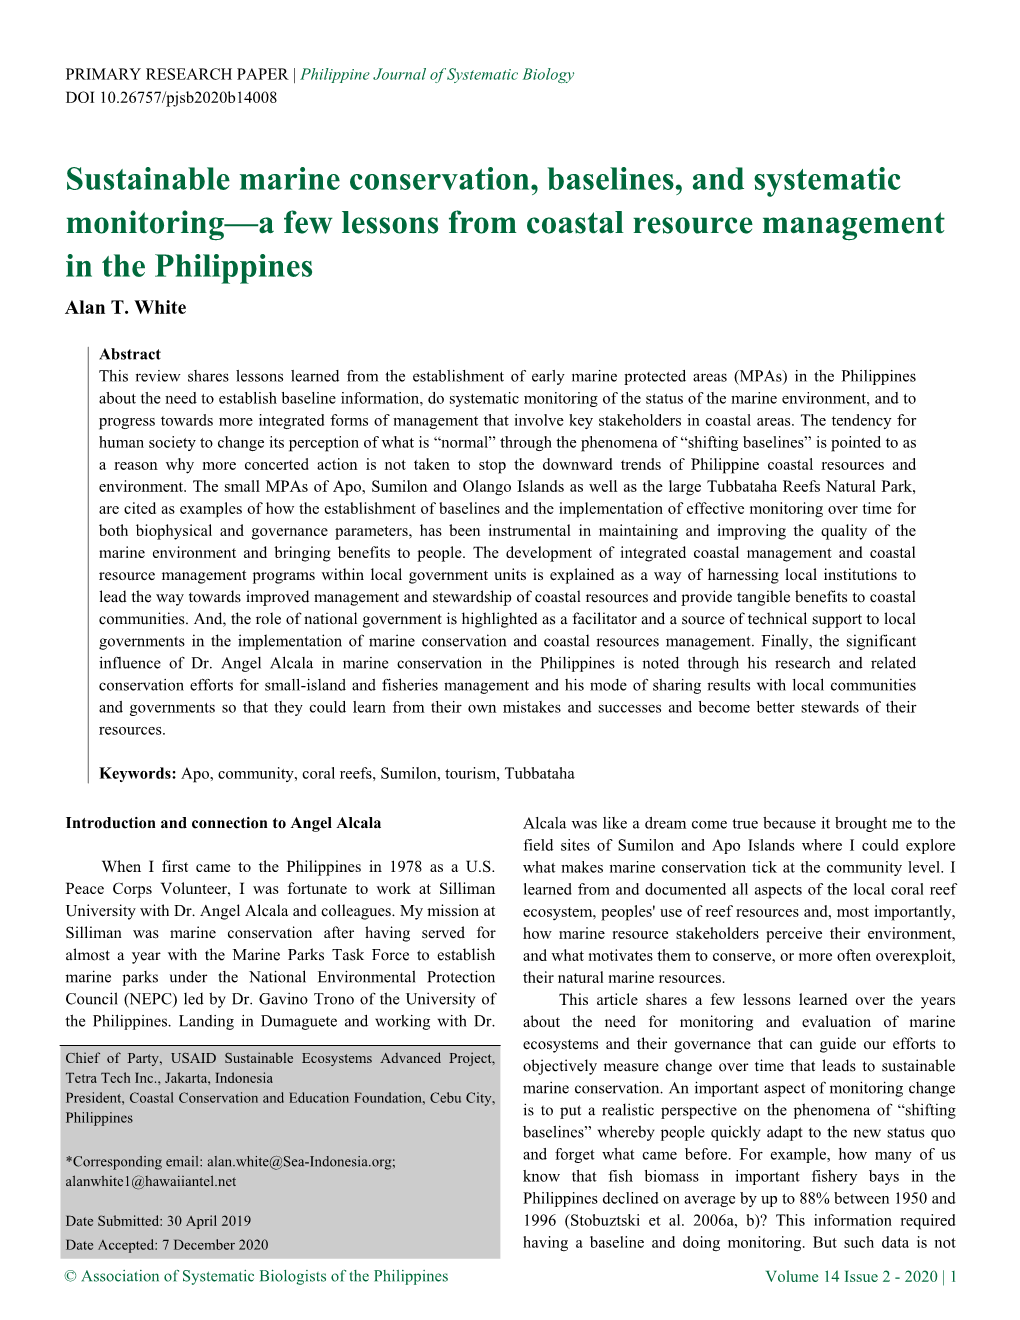 Sustainable Marine Conservation, Baselines, and Systematic Monitoring—A Few Lessons from Coastal Resource Management in the Philippines Alan T